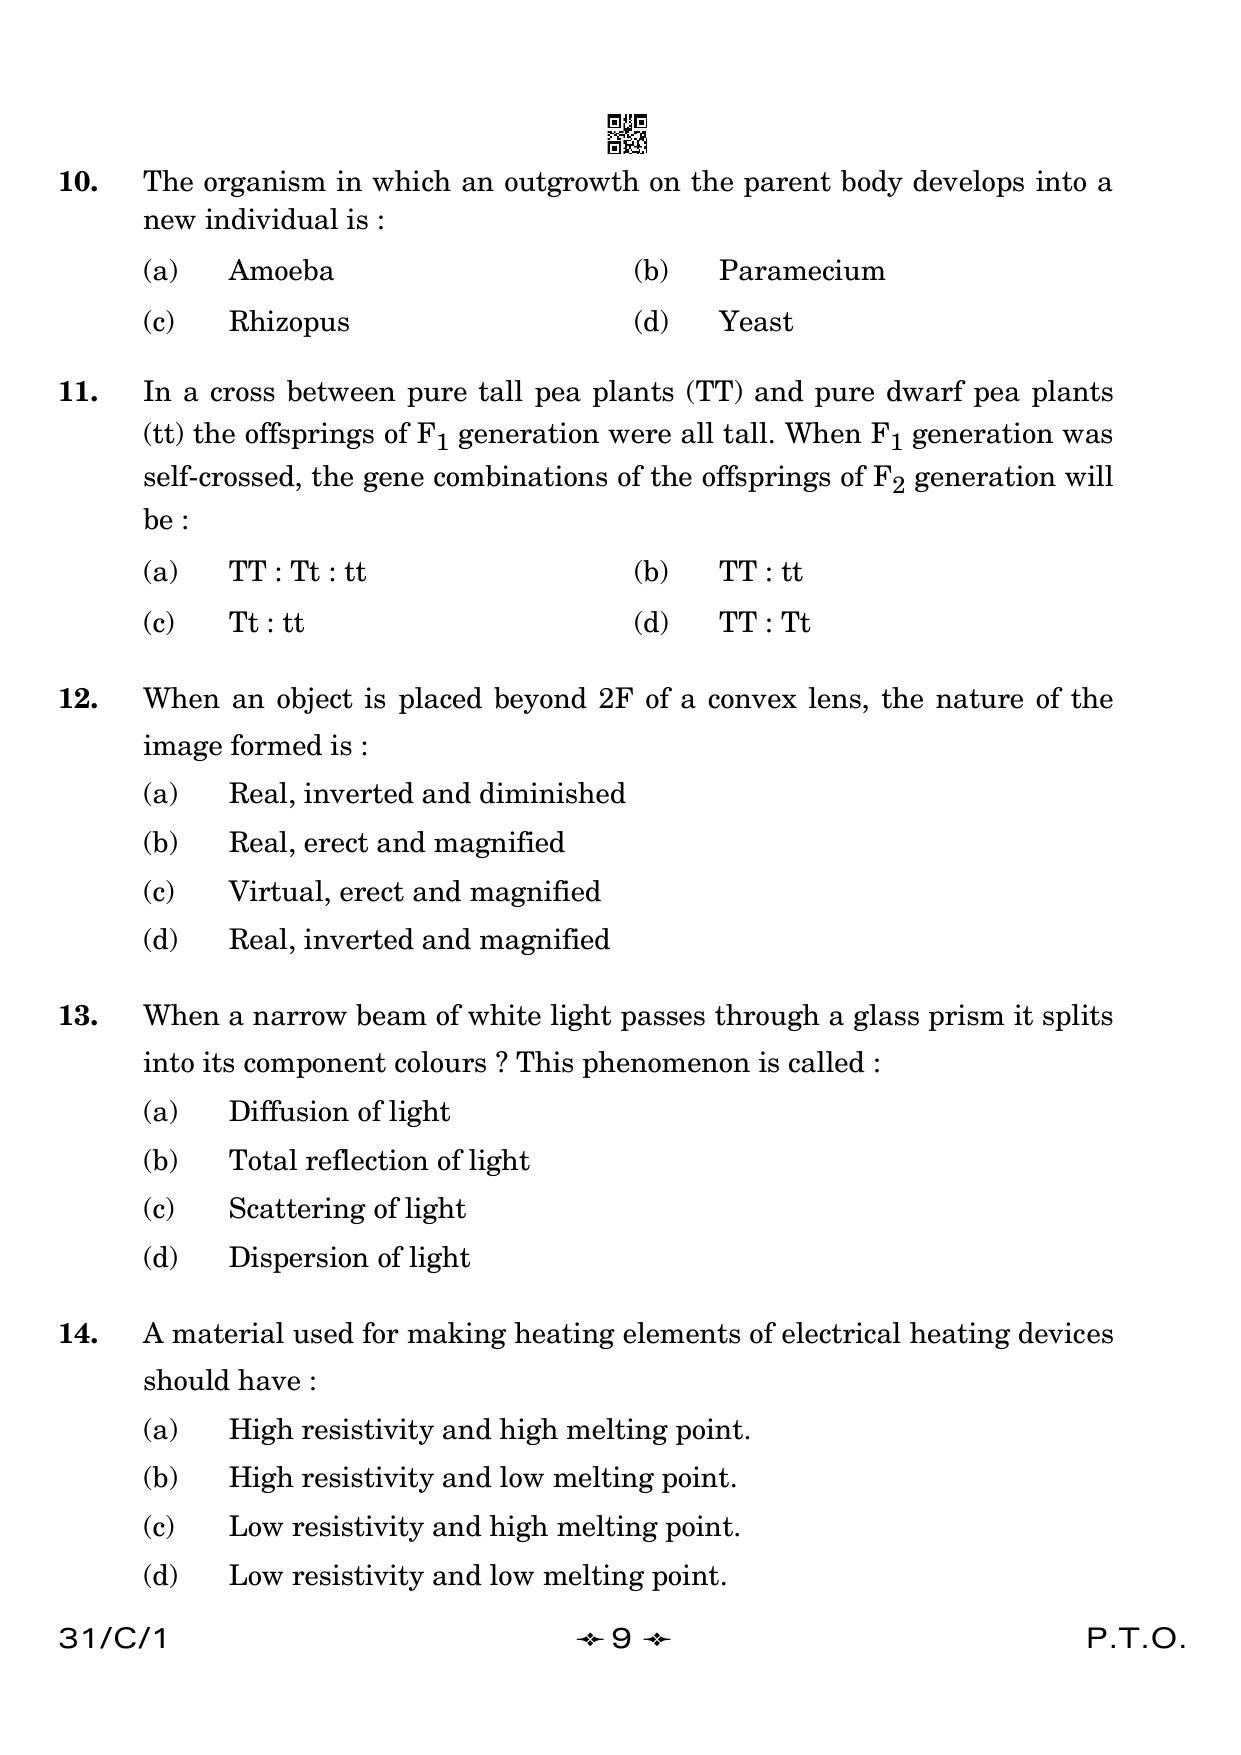 CBSE Class 10 31-1 Science 2023 (Compartment) Question Paper - Page 9